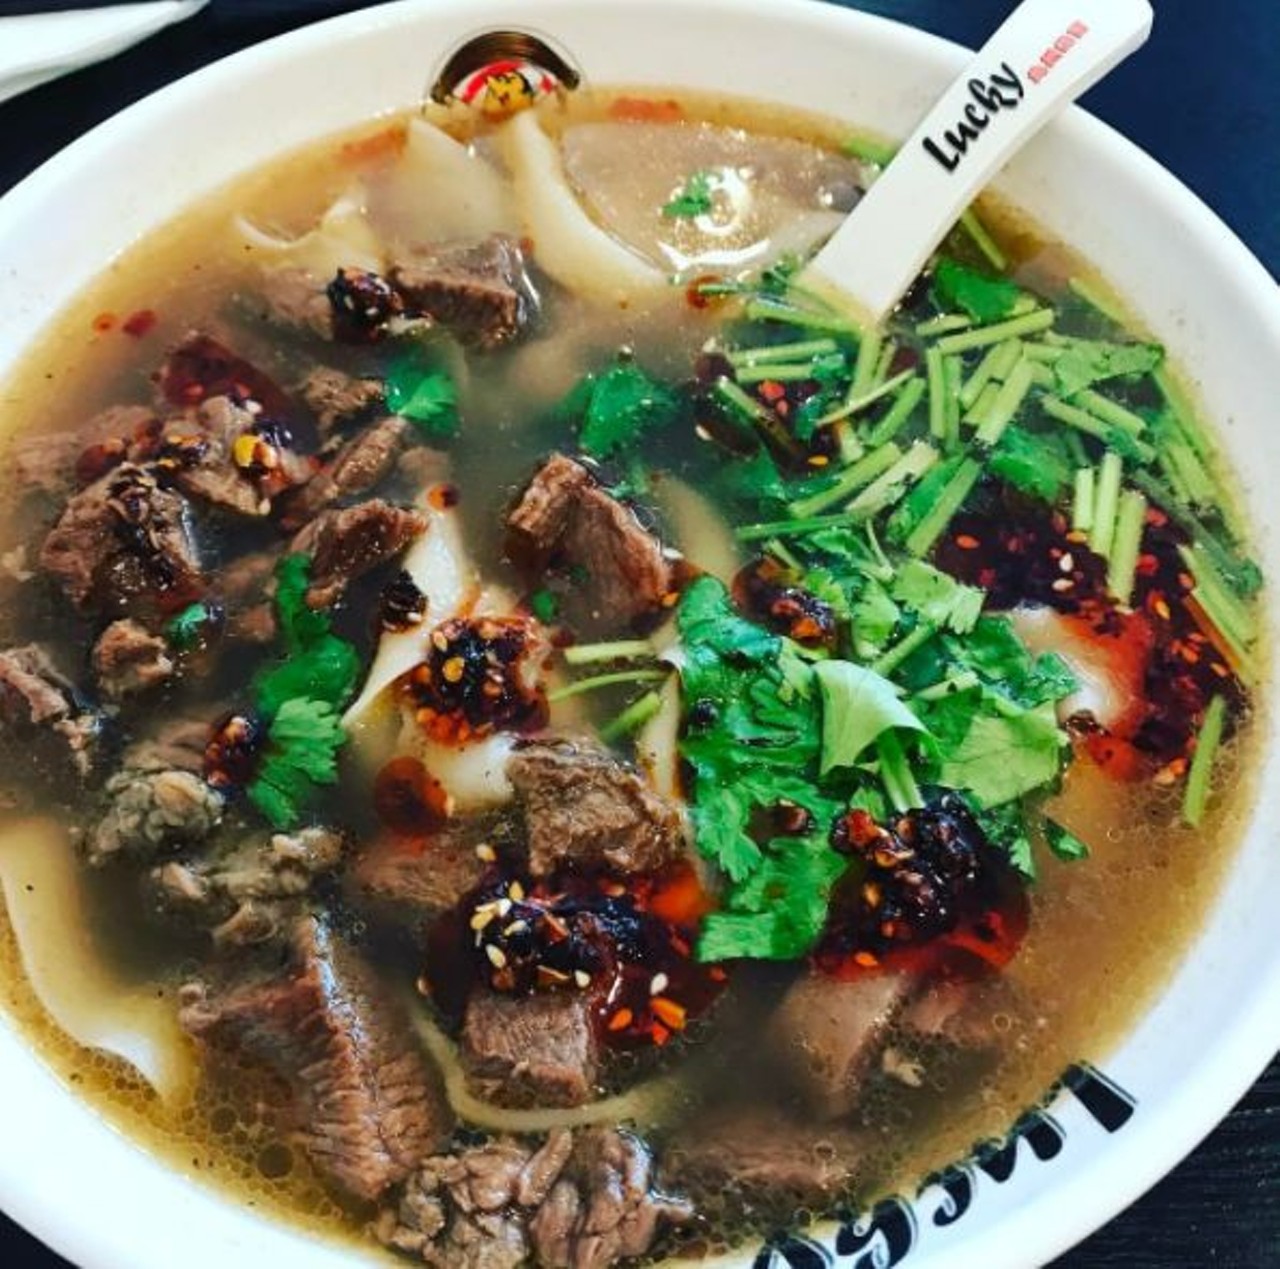 Lucky Noodle ?
8525 Blanco Road, (210) 267-9717
It may be a new eatery, but it's already climbing to the top of our list of favorites.
Photo via Instagram, shalisa72